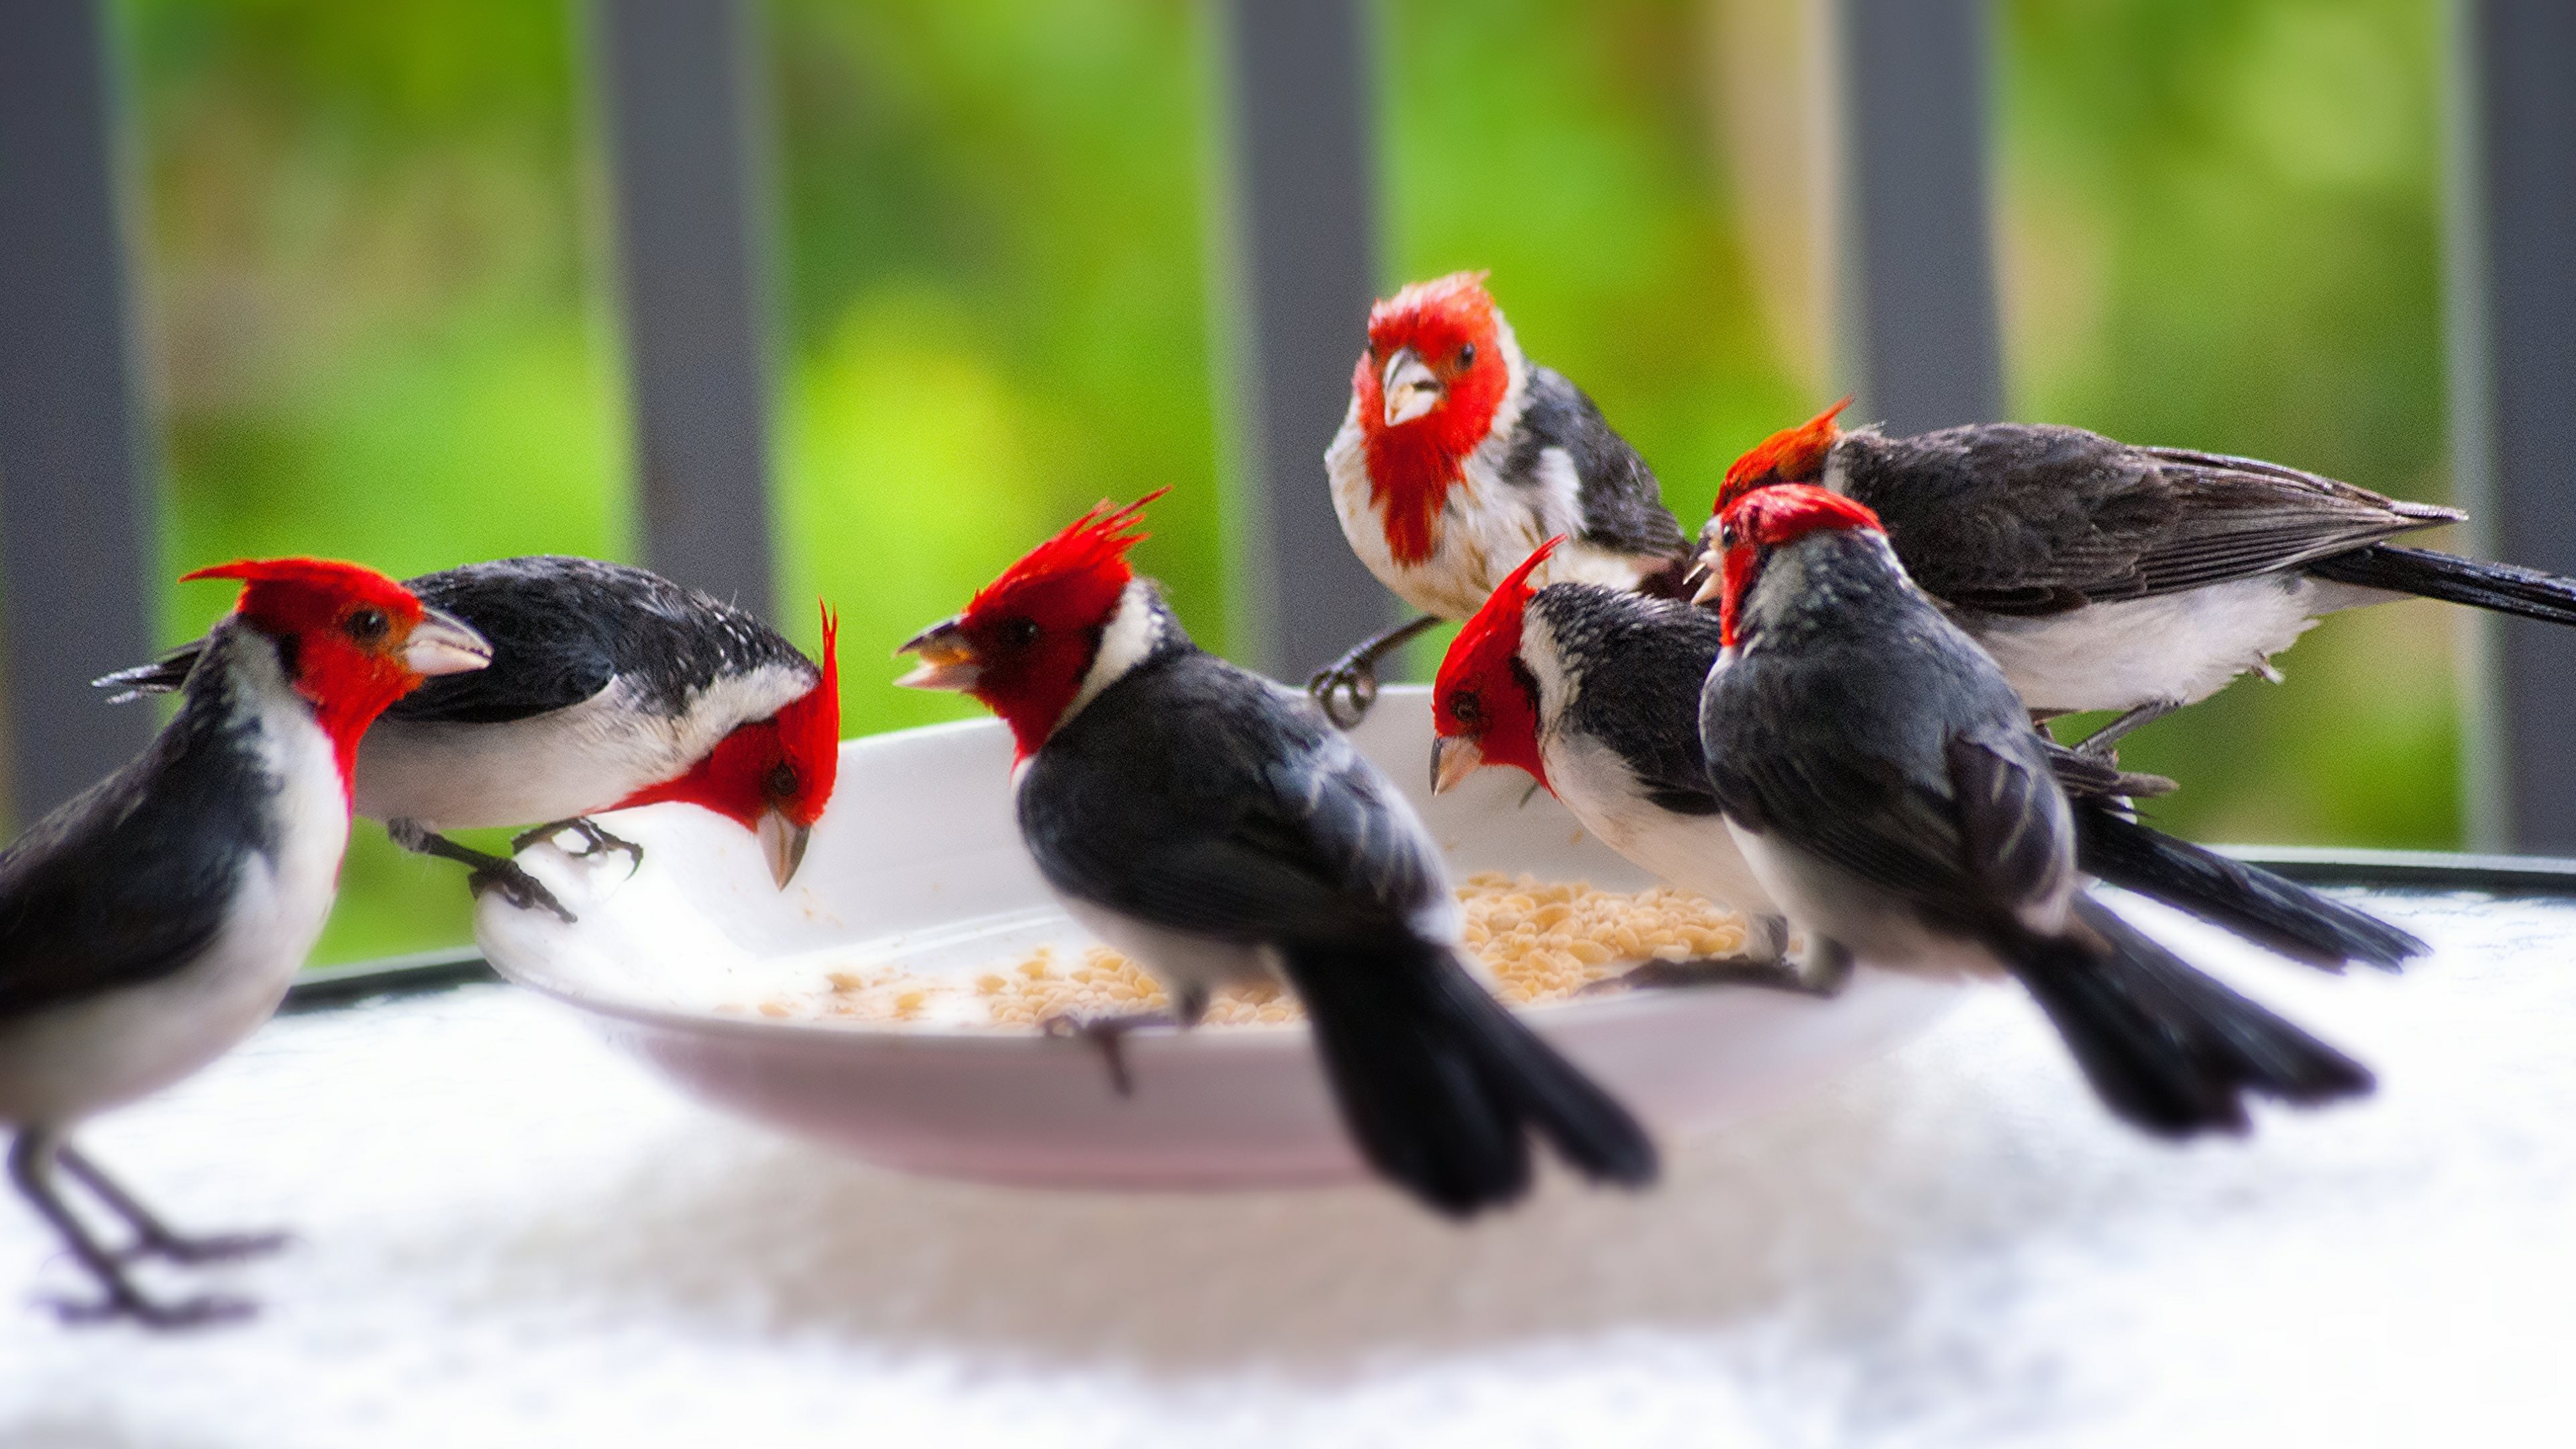 Red-Crested Cardinals by Kristin Klein